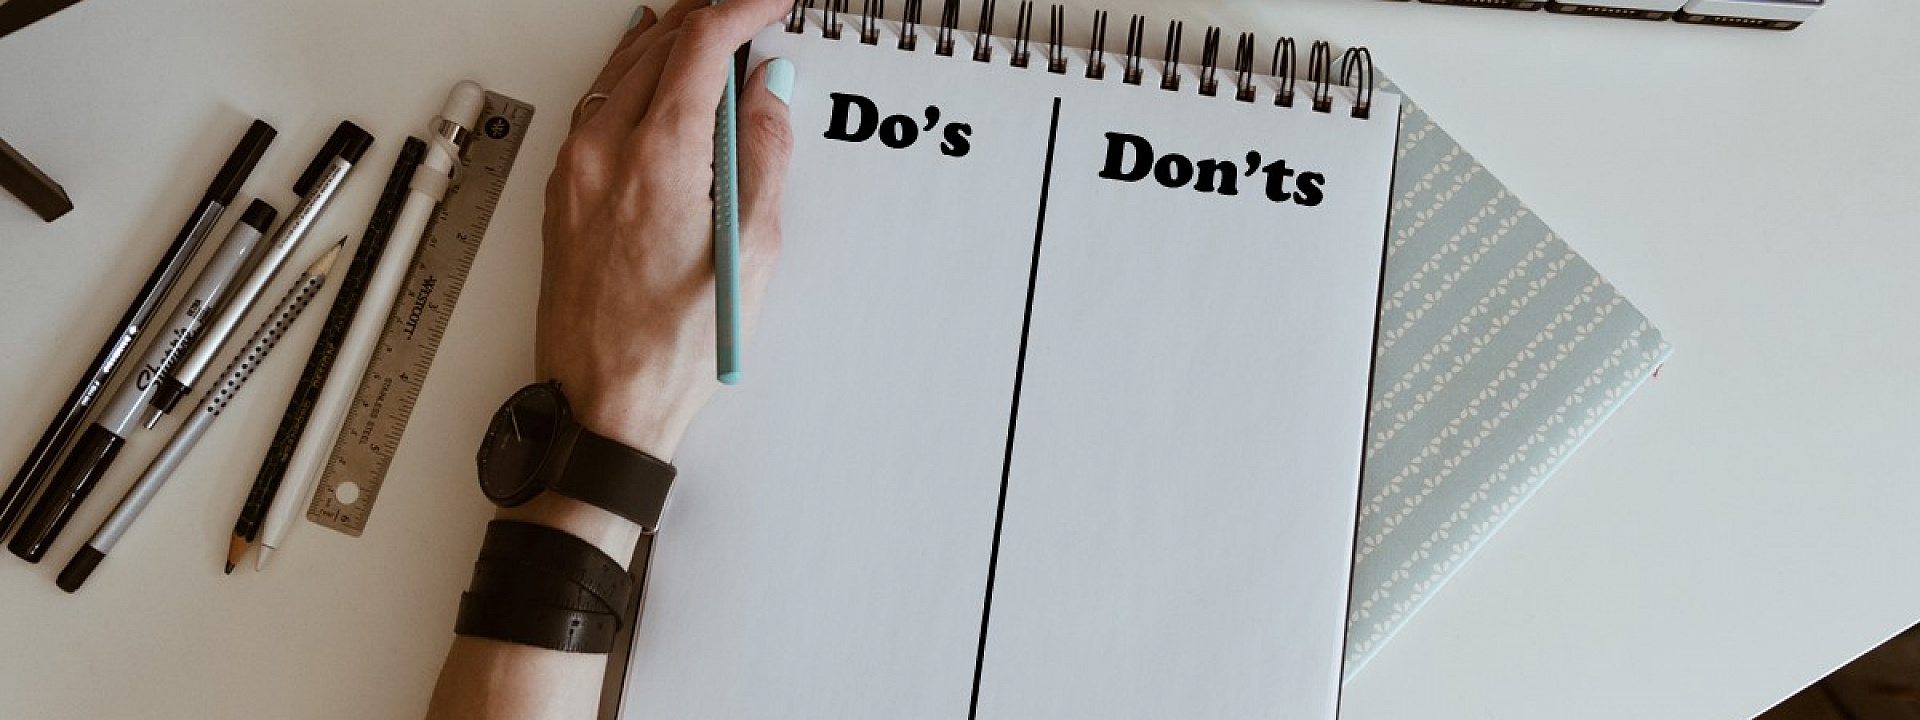 Do's and Don'ts list